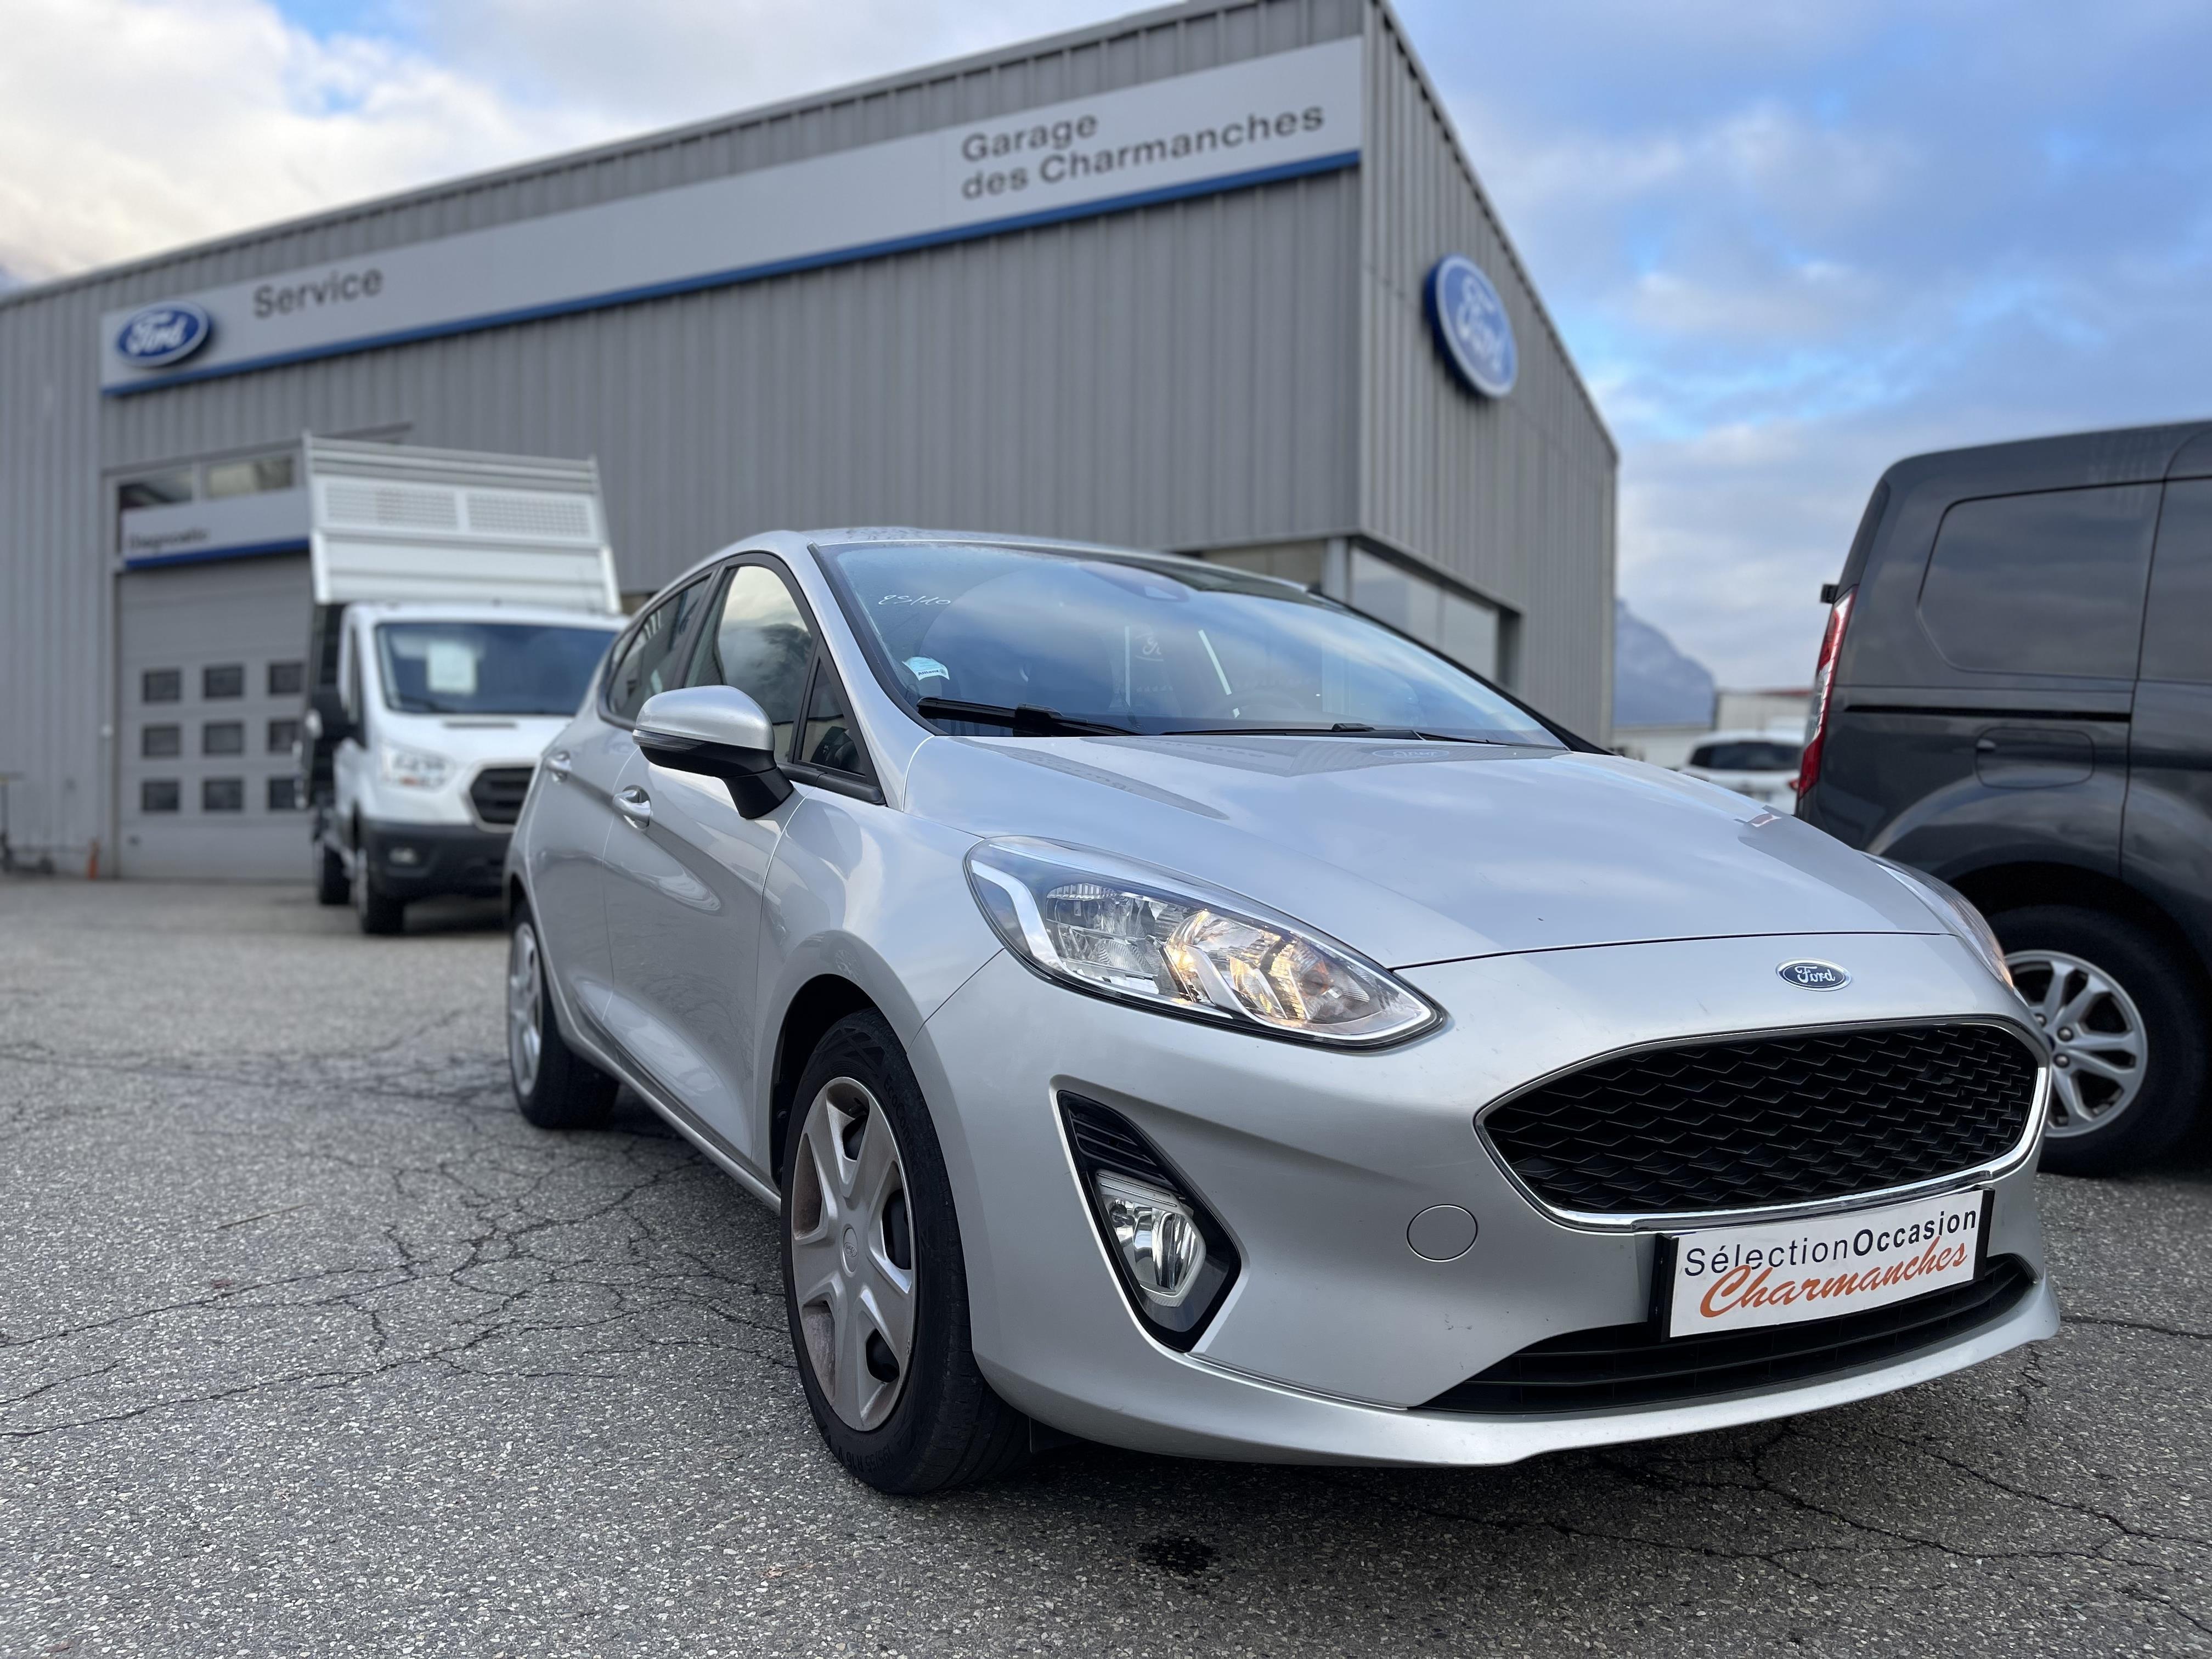 FORD FIESTA ford-fiesta-mk8-st-line occasion - Le Parking